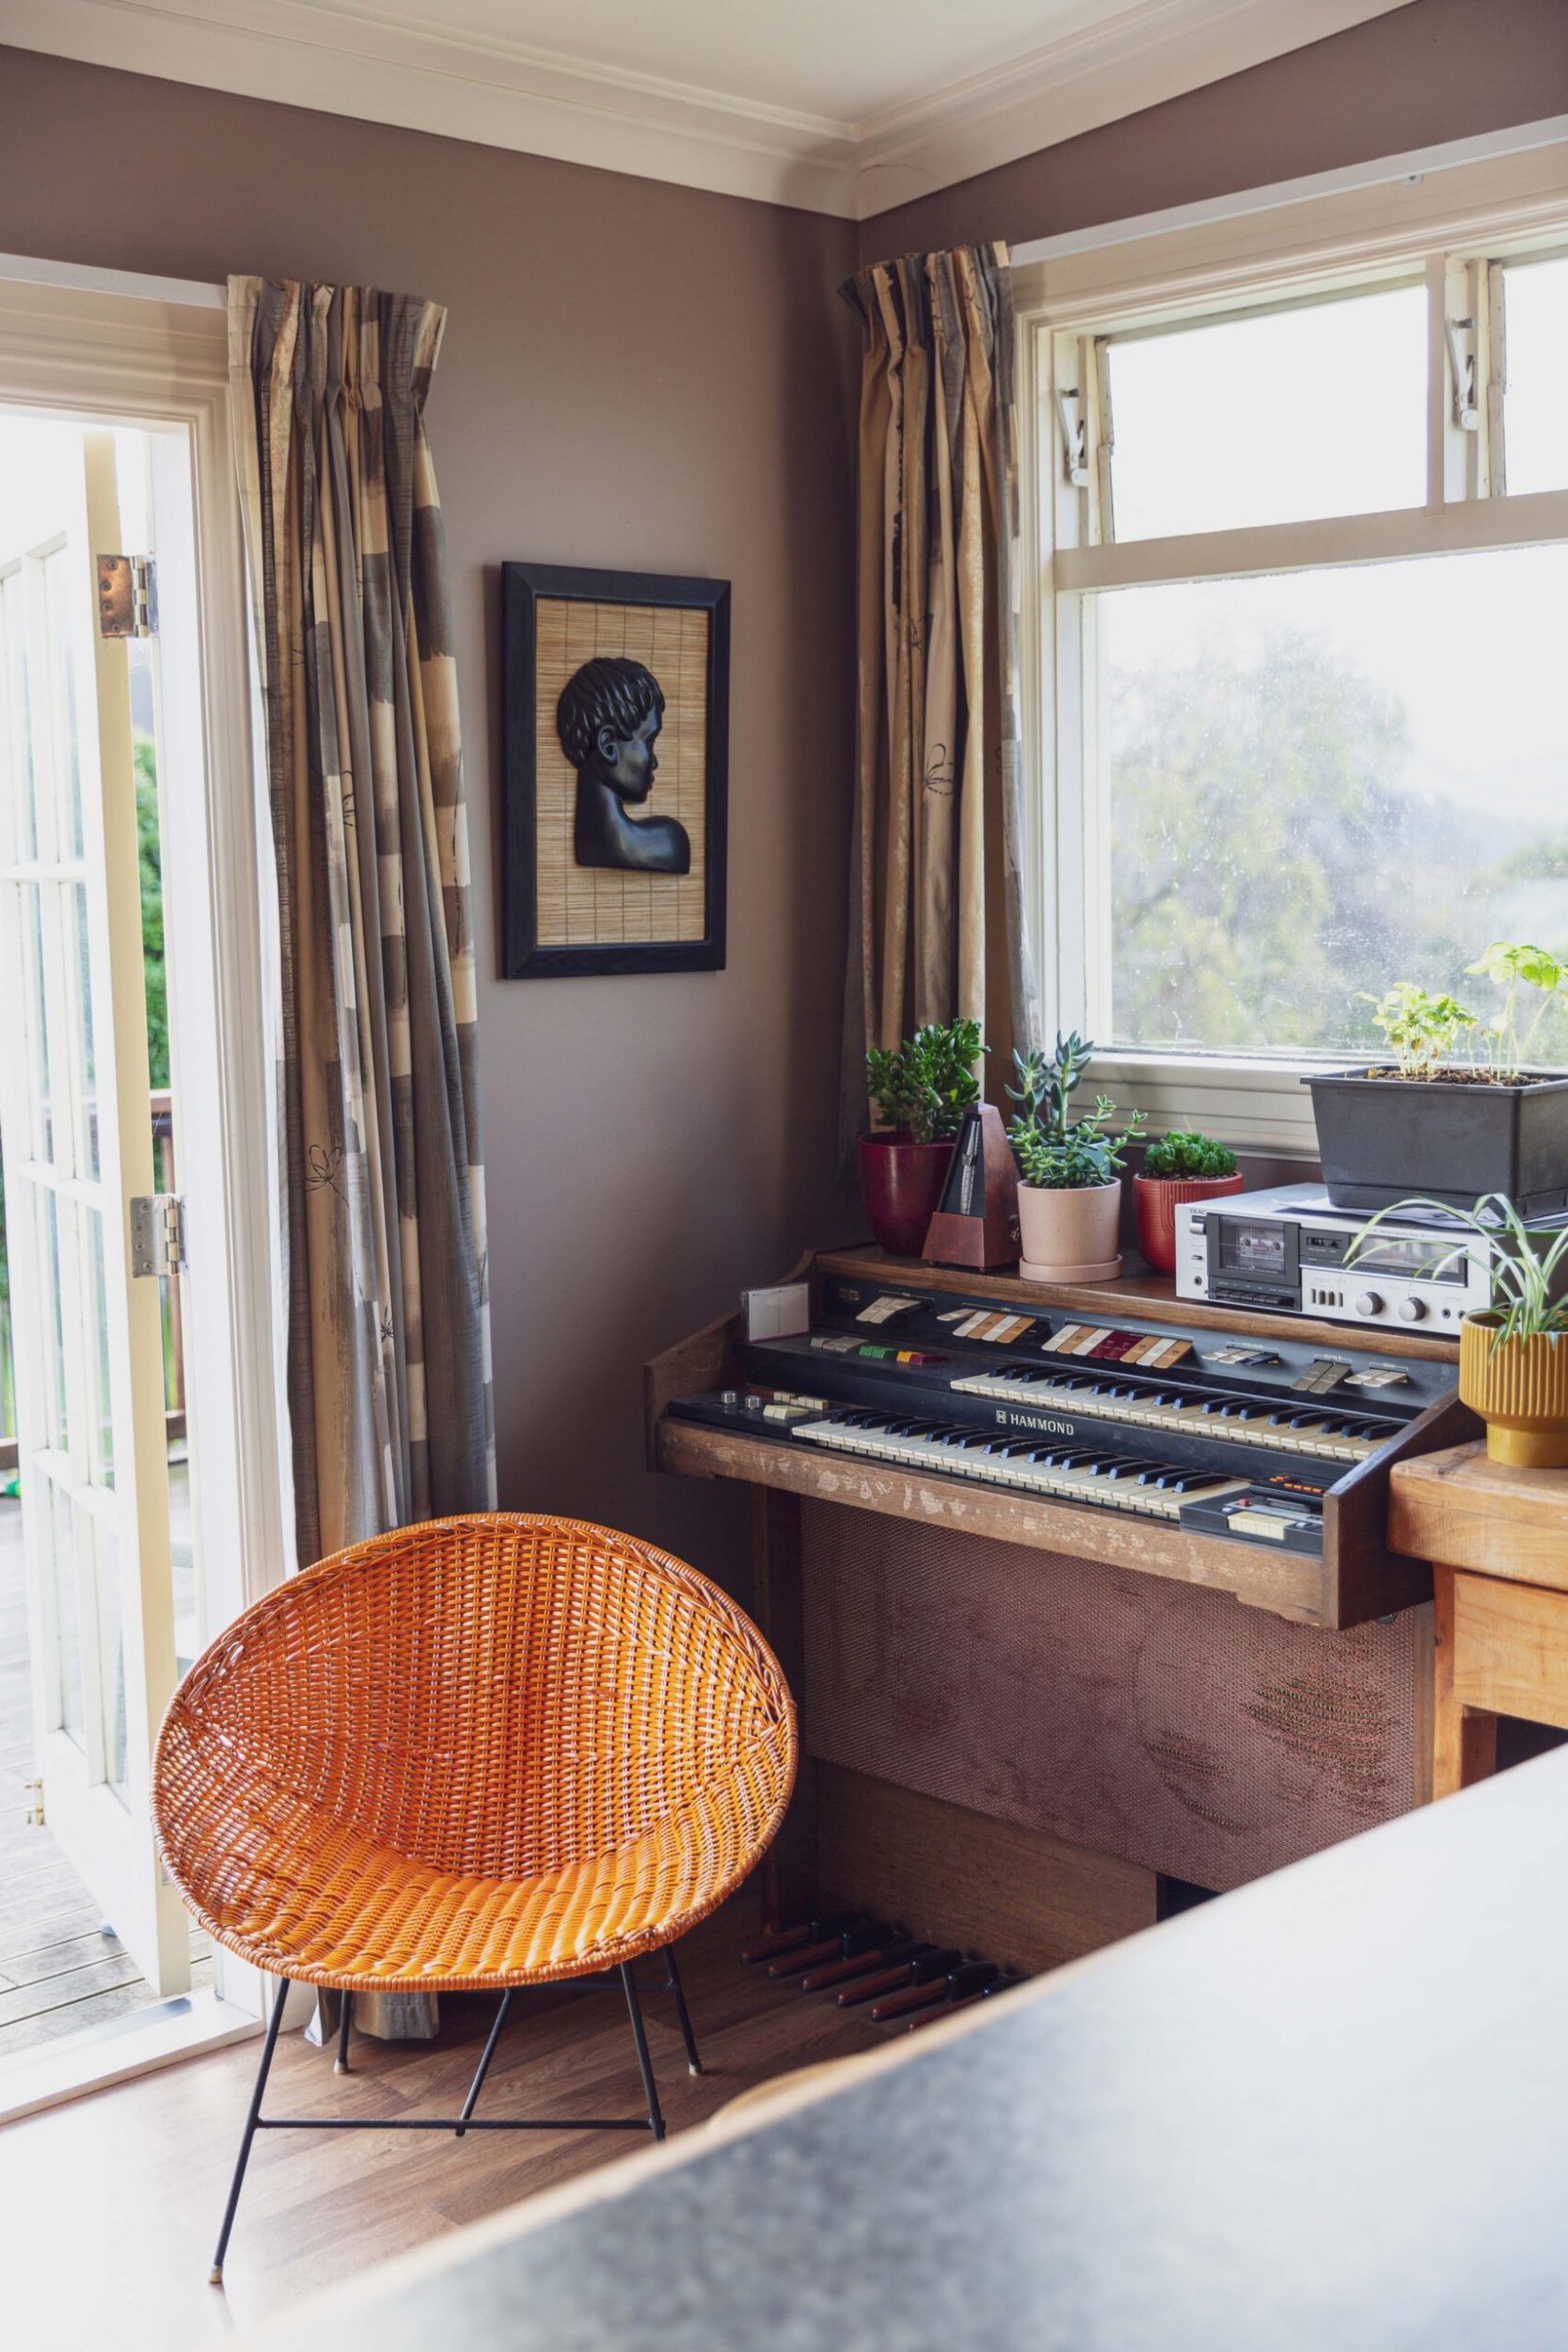 Brown round rattan chair next to a vintage electric organ on a brown table 